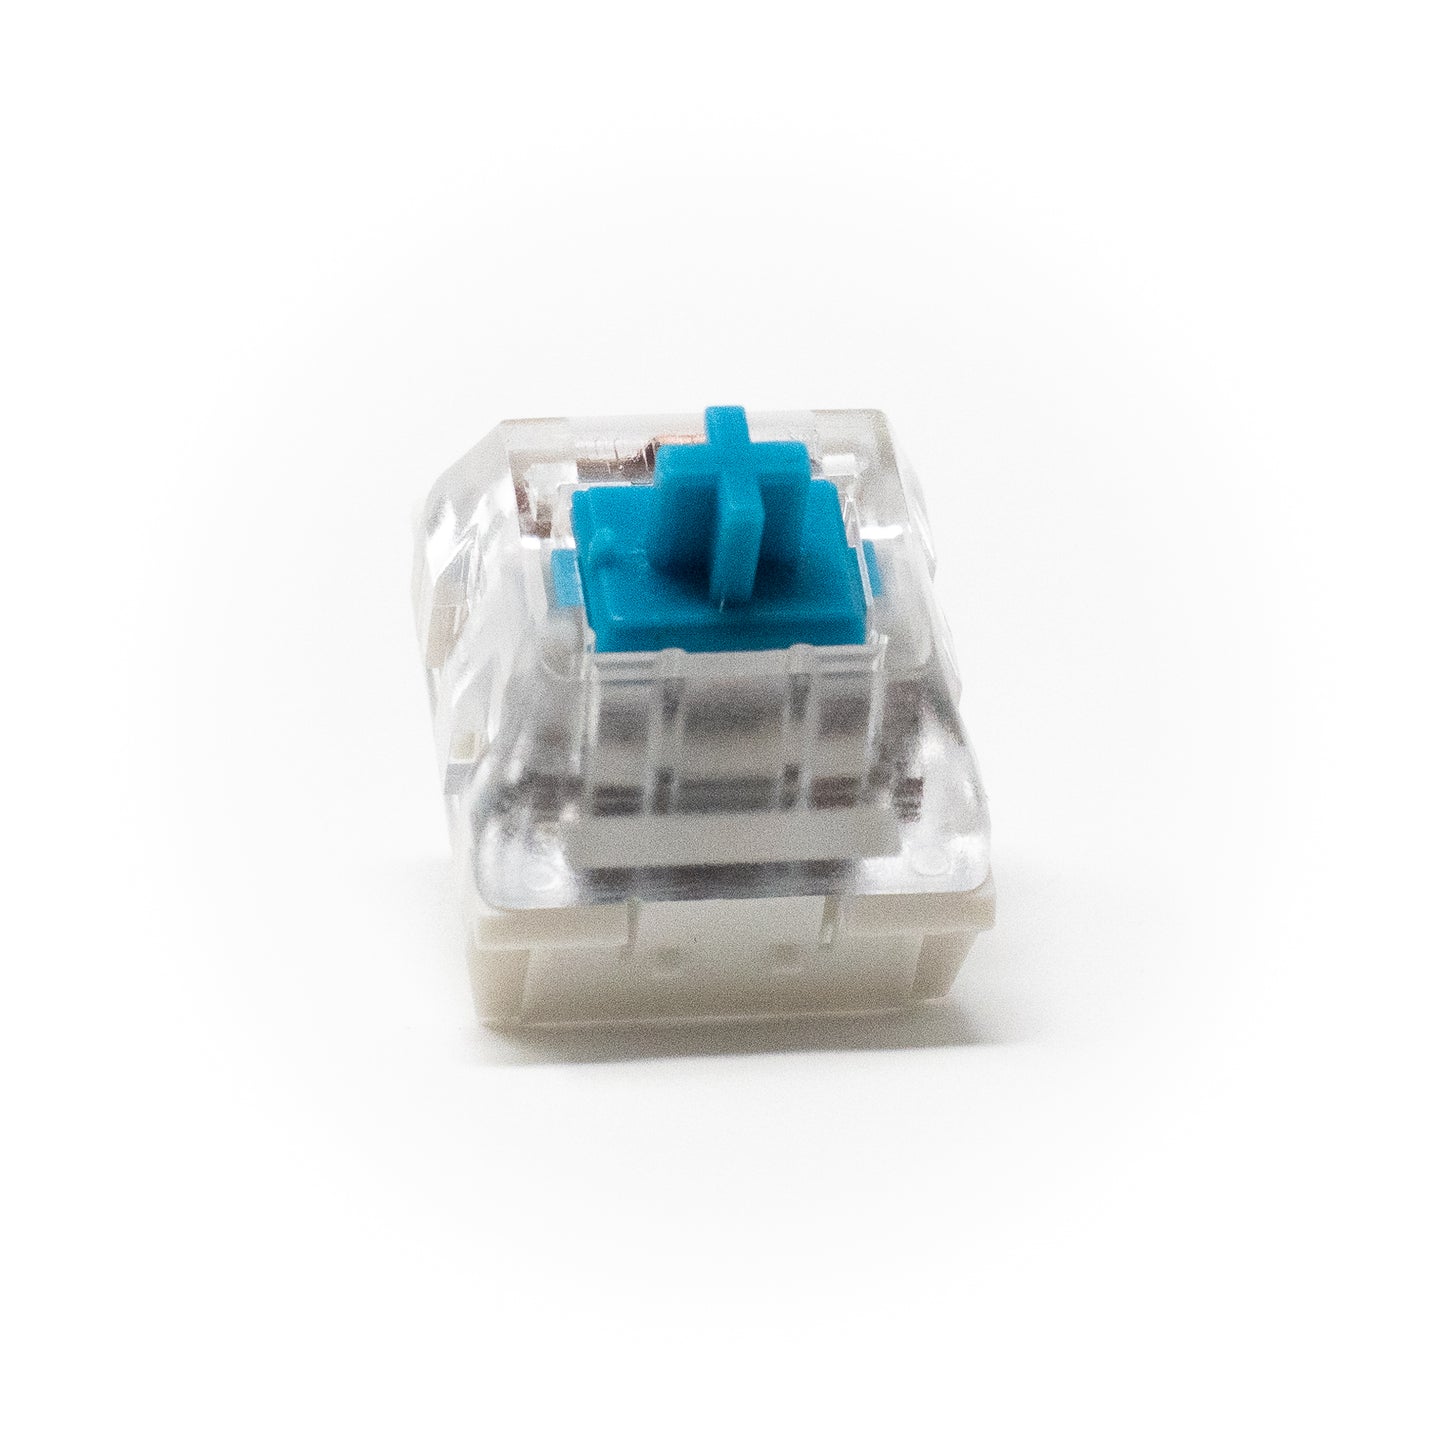 Kailh Blue Keyswitches x 25